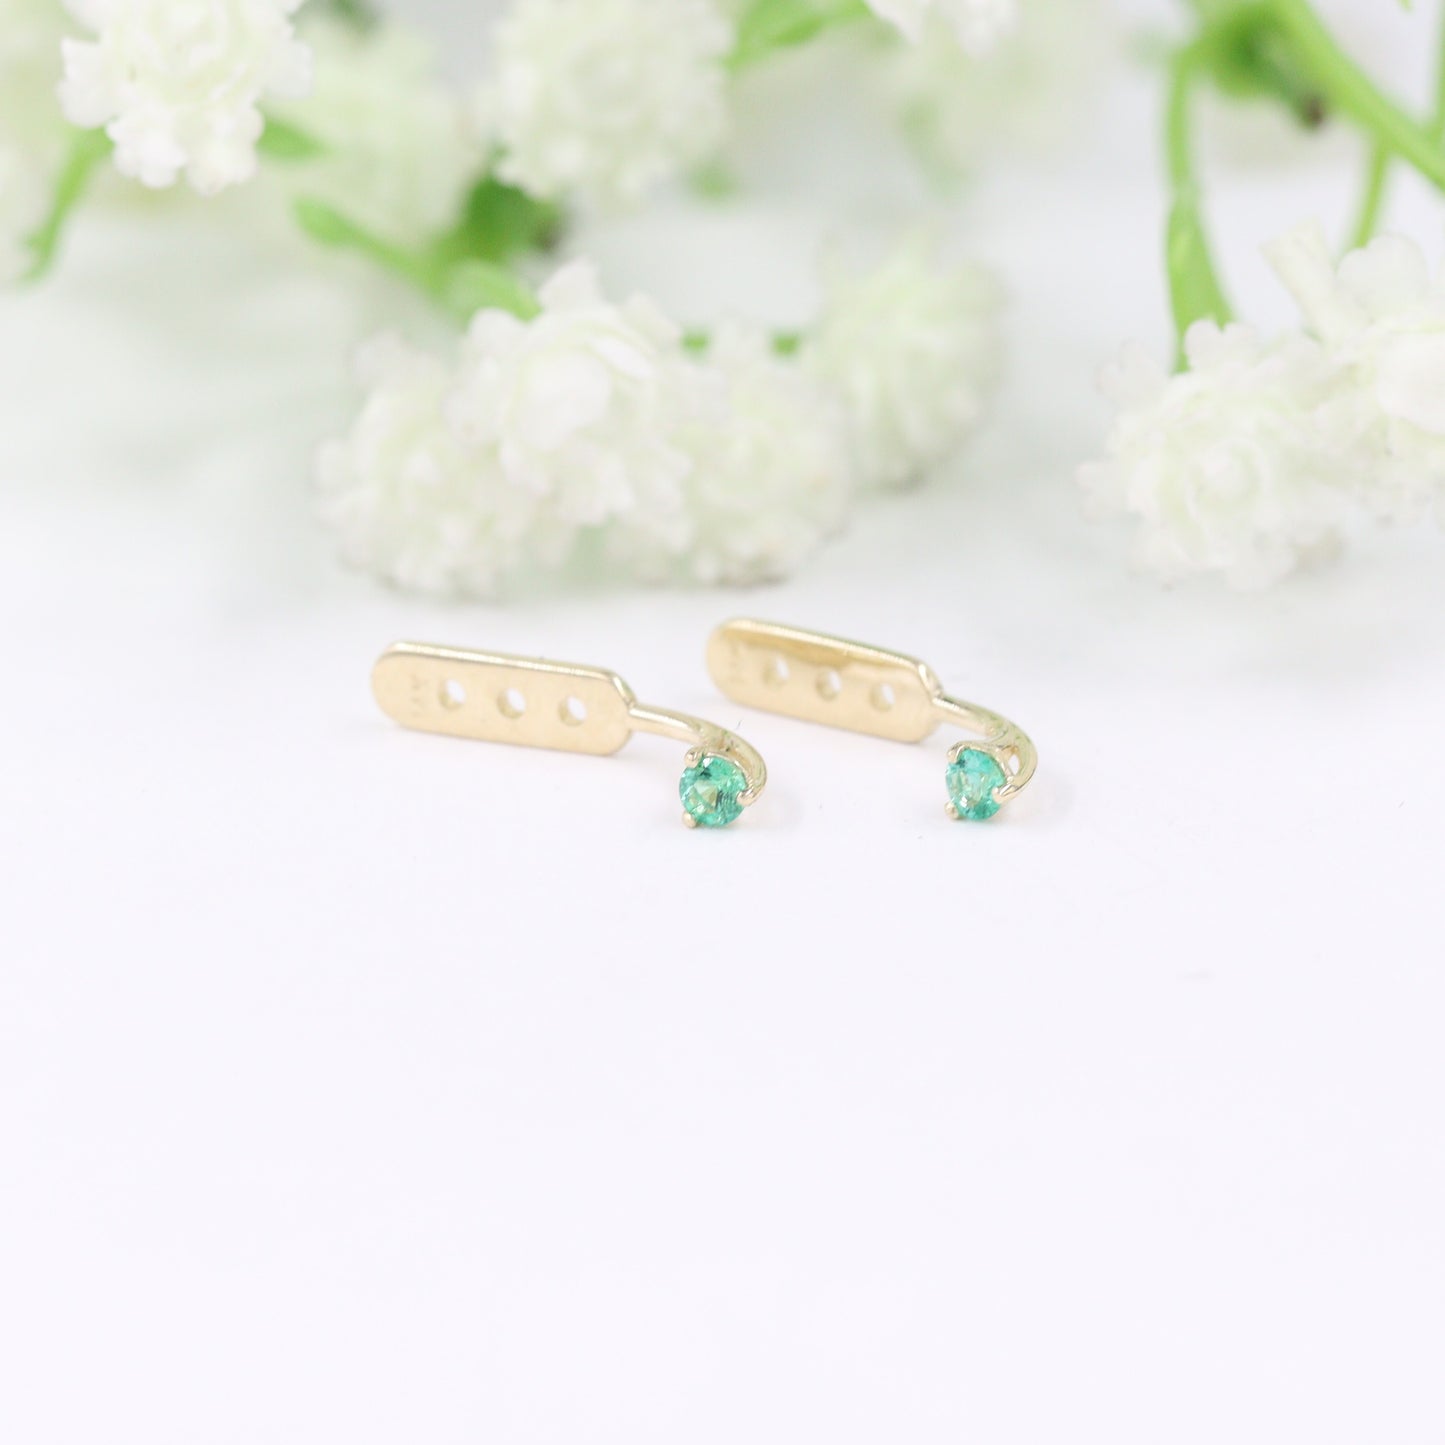 Natural Round Emerald Jacket Earrings 0.1ct/ Three Prong Set Round Emerald Stud Earrings/ Single or Pair Earrings/ Gifts for her